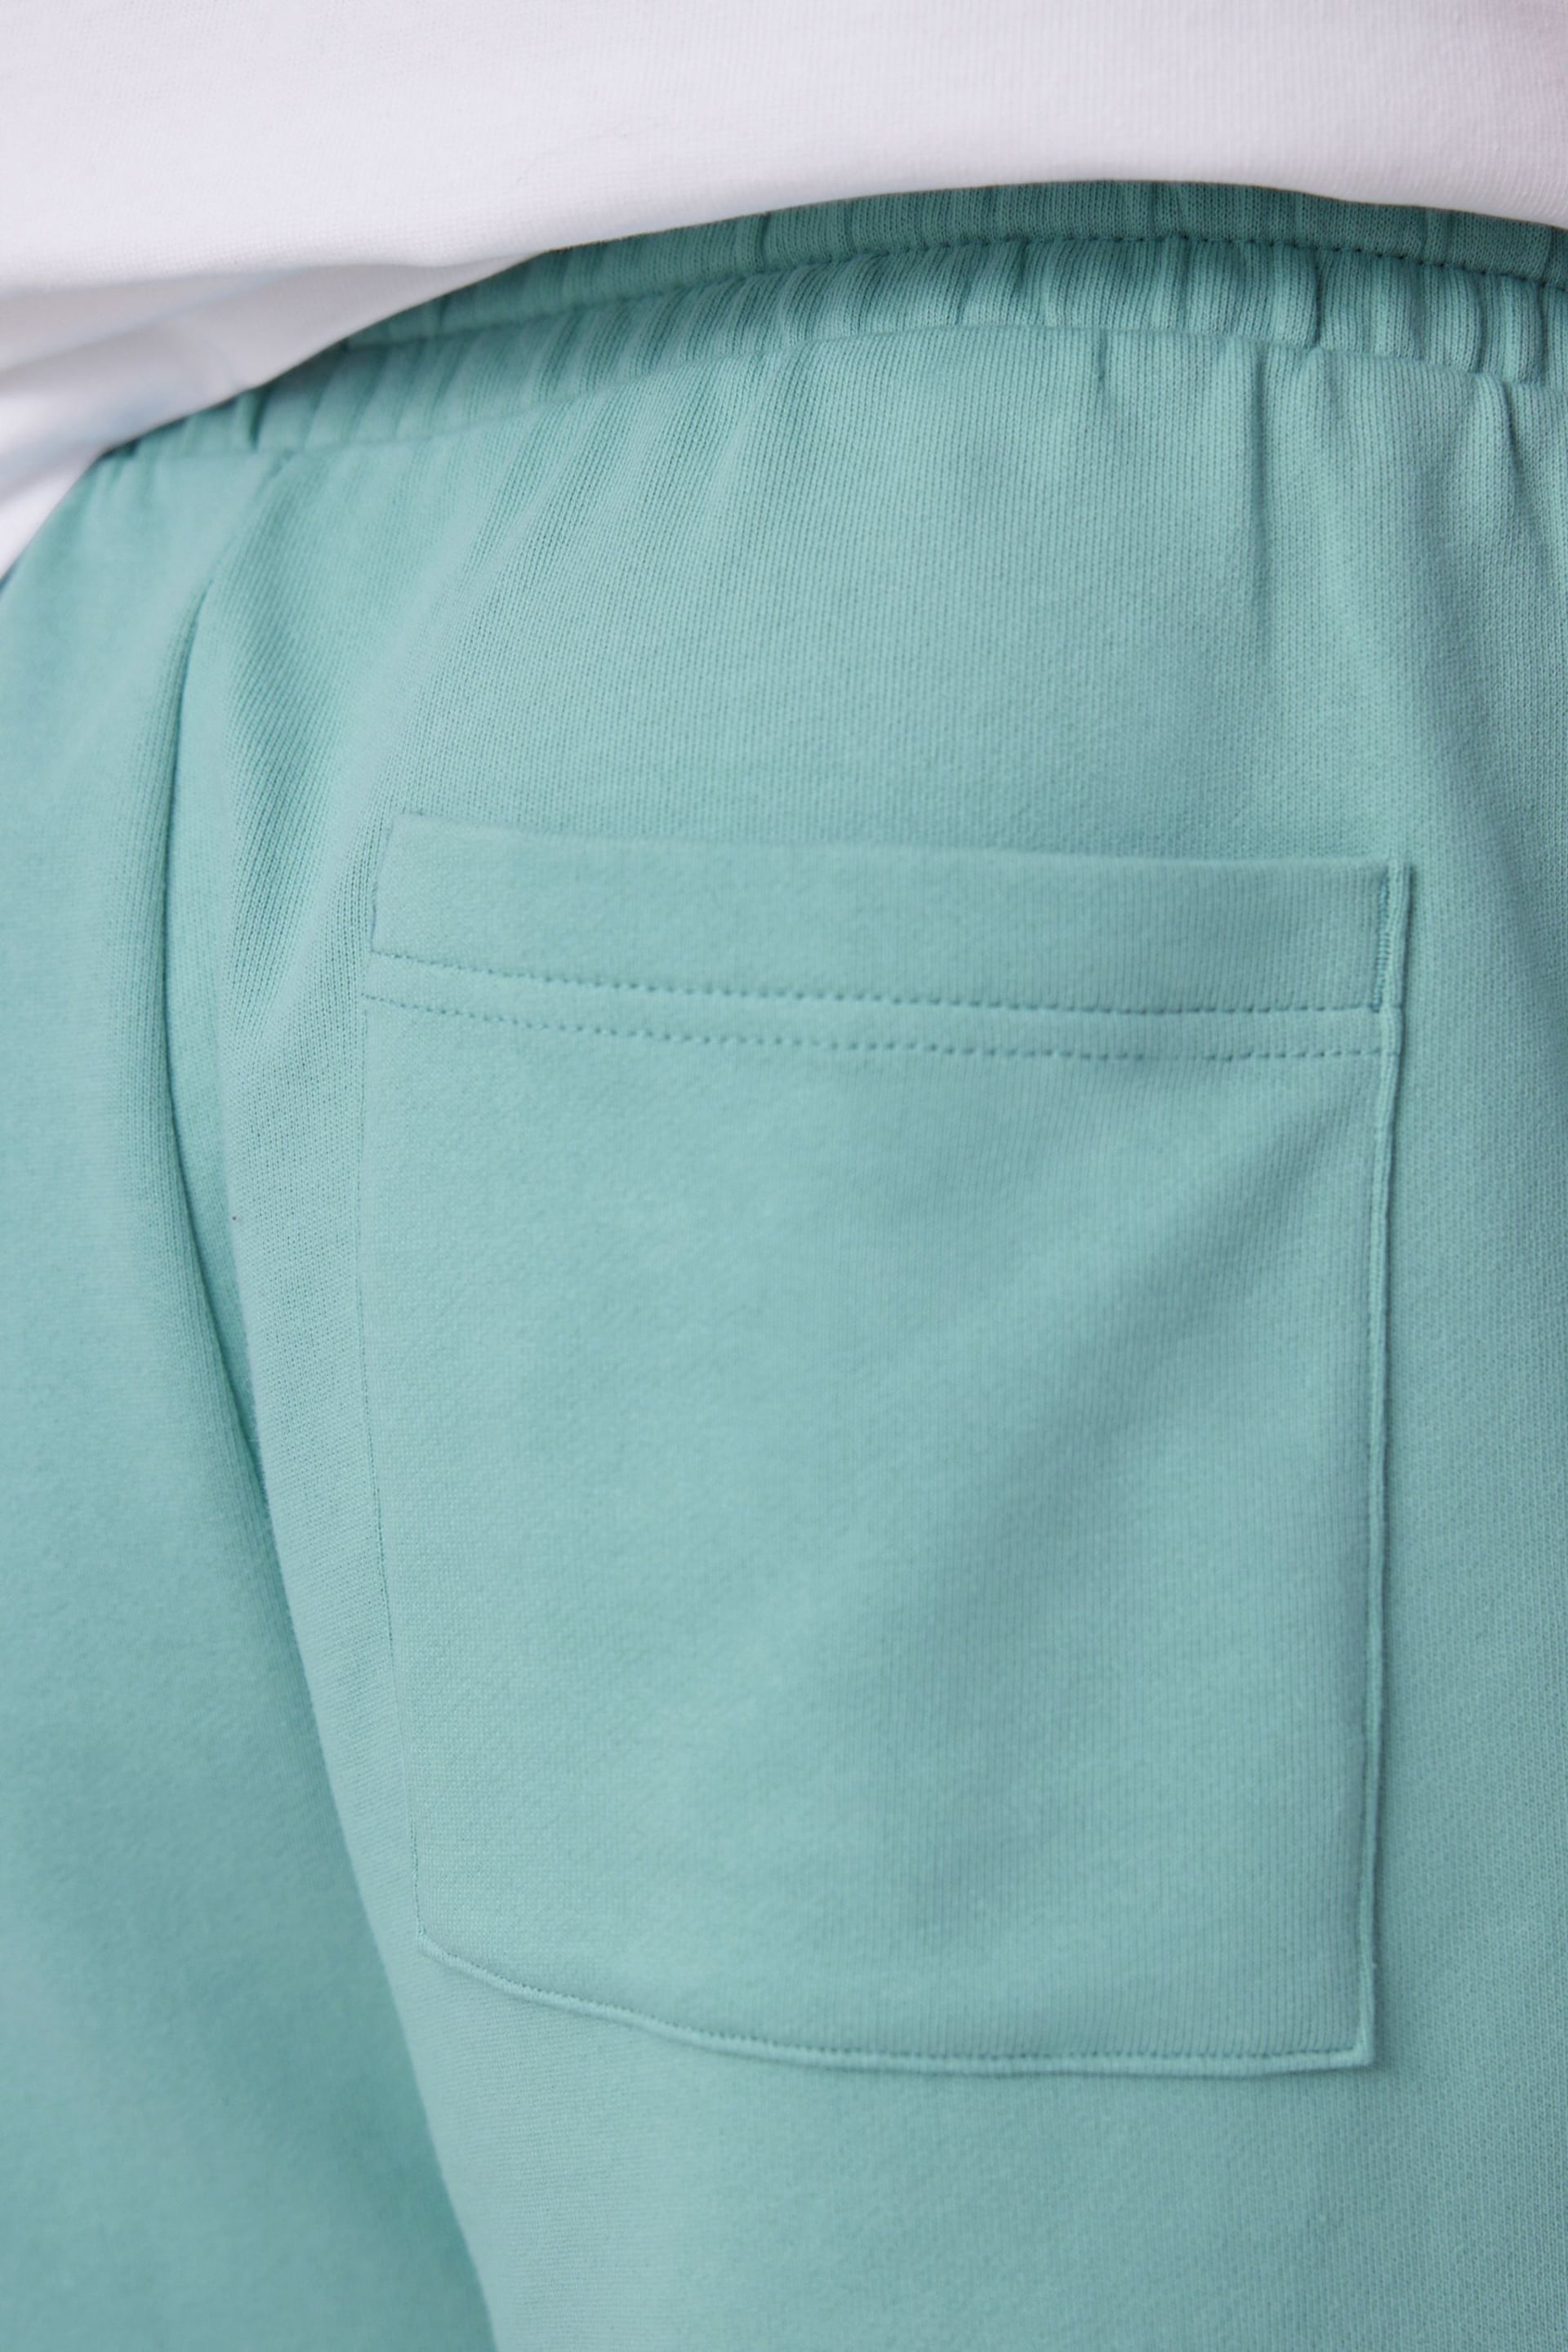 Blue/Green Lightweight Jogger Shorts 2 Pack - Image 9 of 14